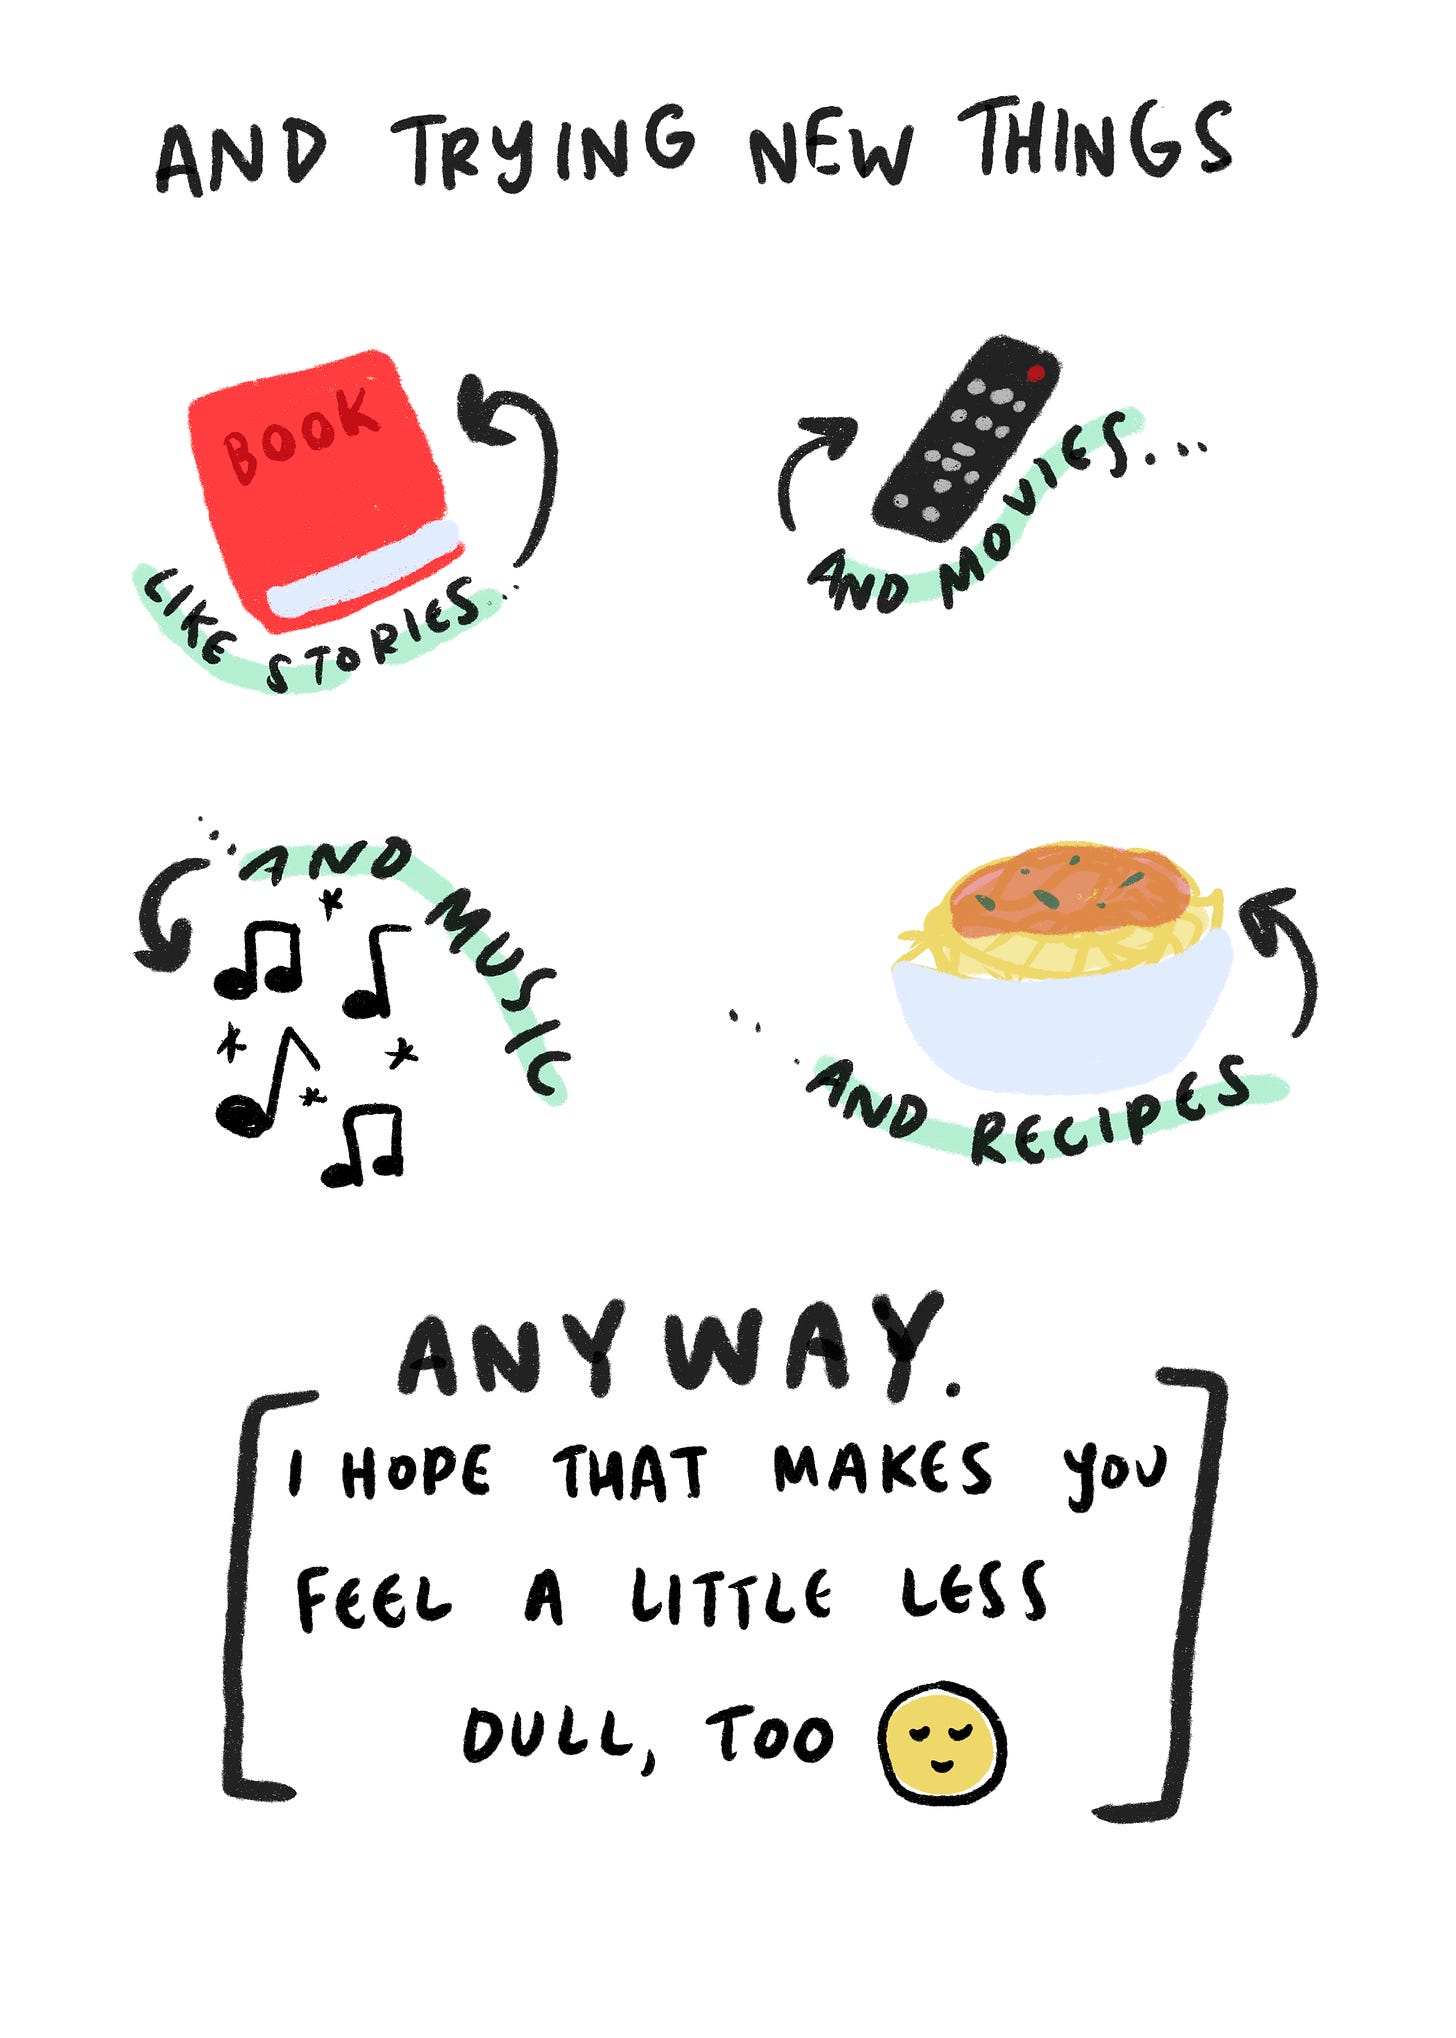 Text reads: and trying new things. Illustrated below is a book, tv remote, music notes, and a bowl of pasta. Below that, it reads: Anyway. I hope that makes you feel a little less dull, too.